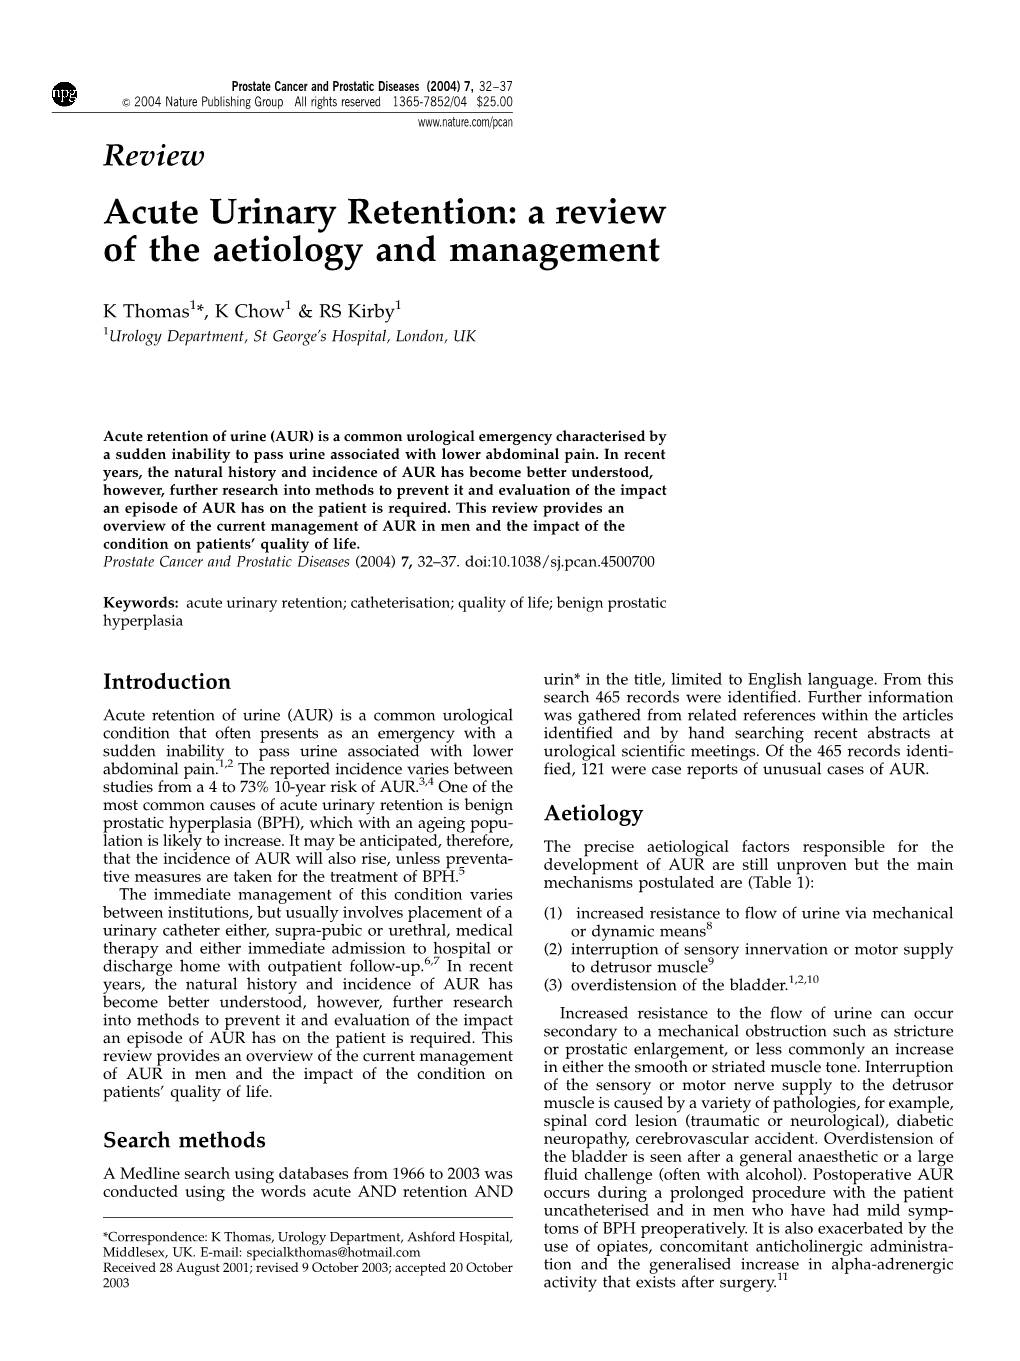 Acute Urinary Retention: a Review of the Aetiology and Management